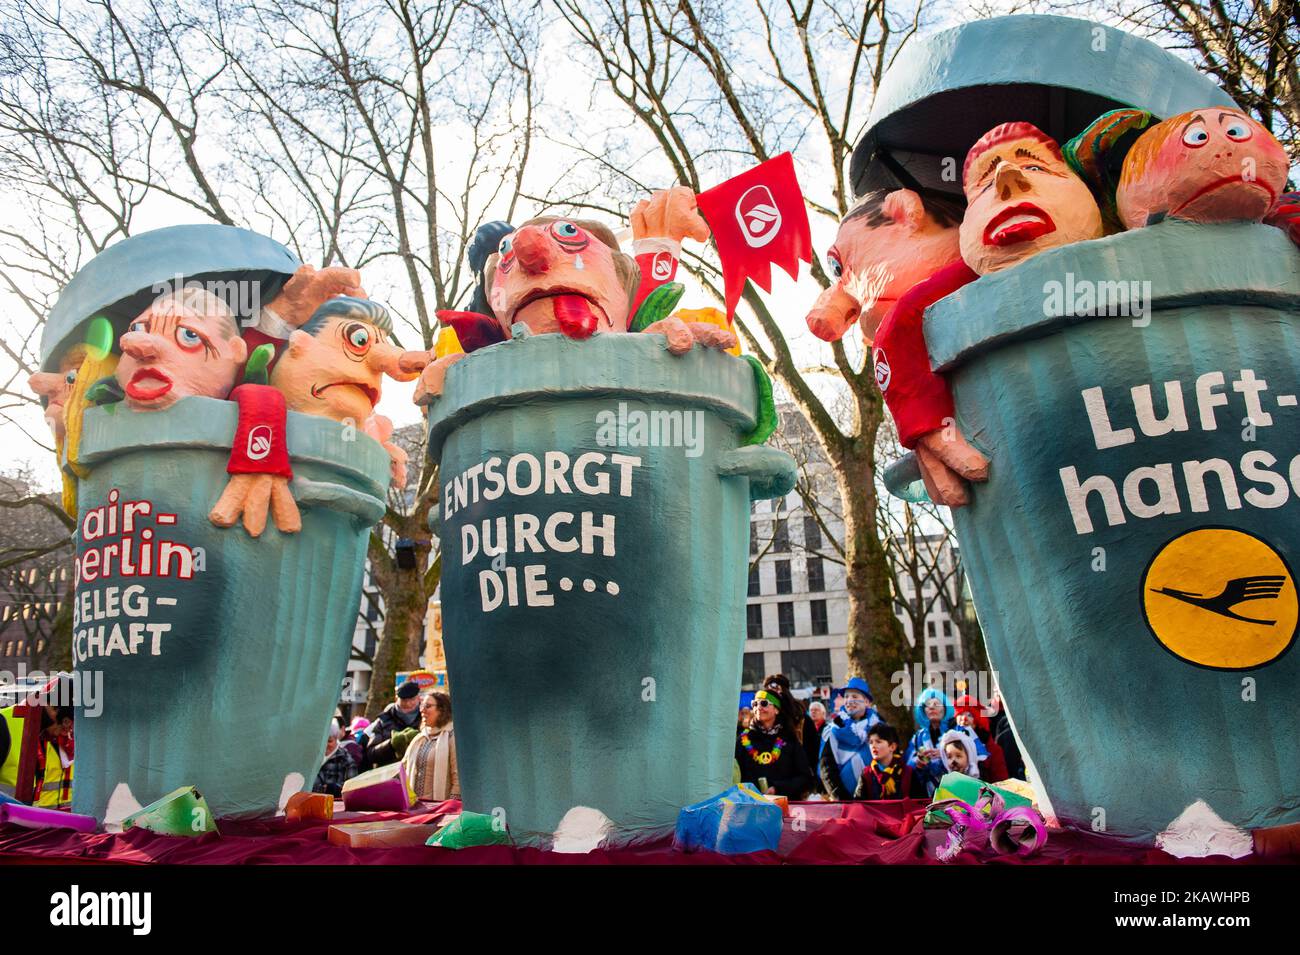 A float featuring the situation between Air Berlin and Lufthansa is seen during the annual Rose Monday parade on February 12, 2018 in Dusseldorf, Germany. Lufthansa took over a large portion of Air Berlin's former routes and planes following Air Berlin's bankruptcy. Political satire is a traditional cornerstone of the annual parades. More than 30 music ensembles and 5,000 participants join the procession through the city. Elaborately built and decorated floats address cultural and political issues and can be satirical, hilarious and even controversial. The politically themed floats of satirist Stock Photo